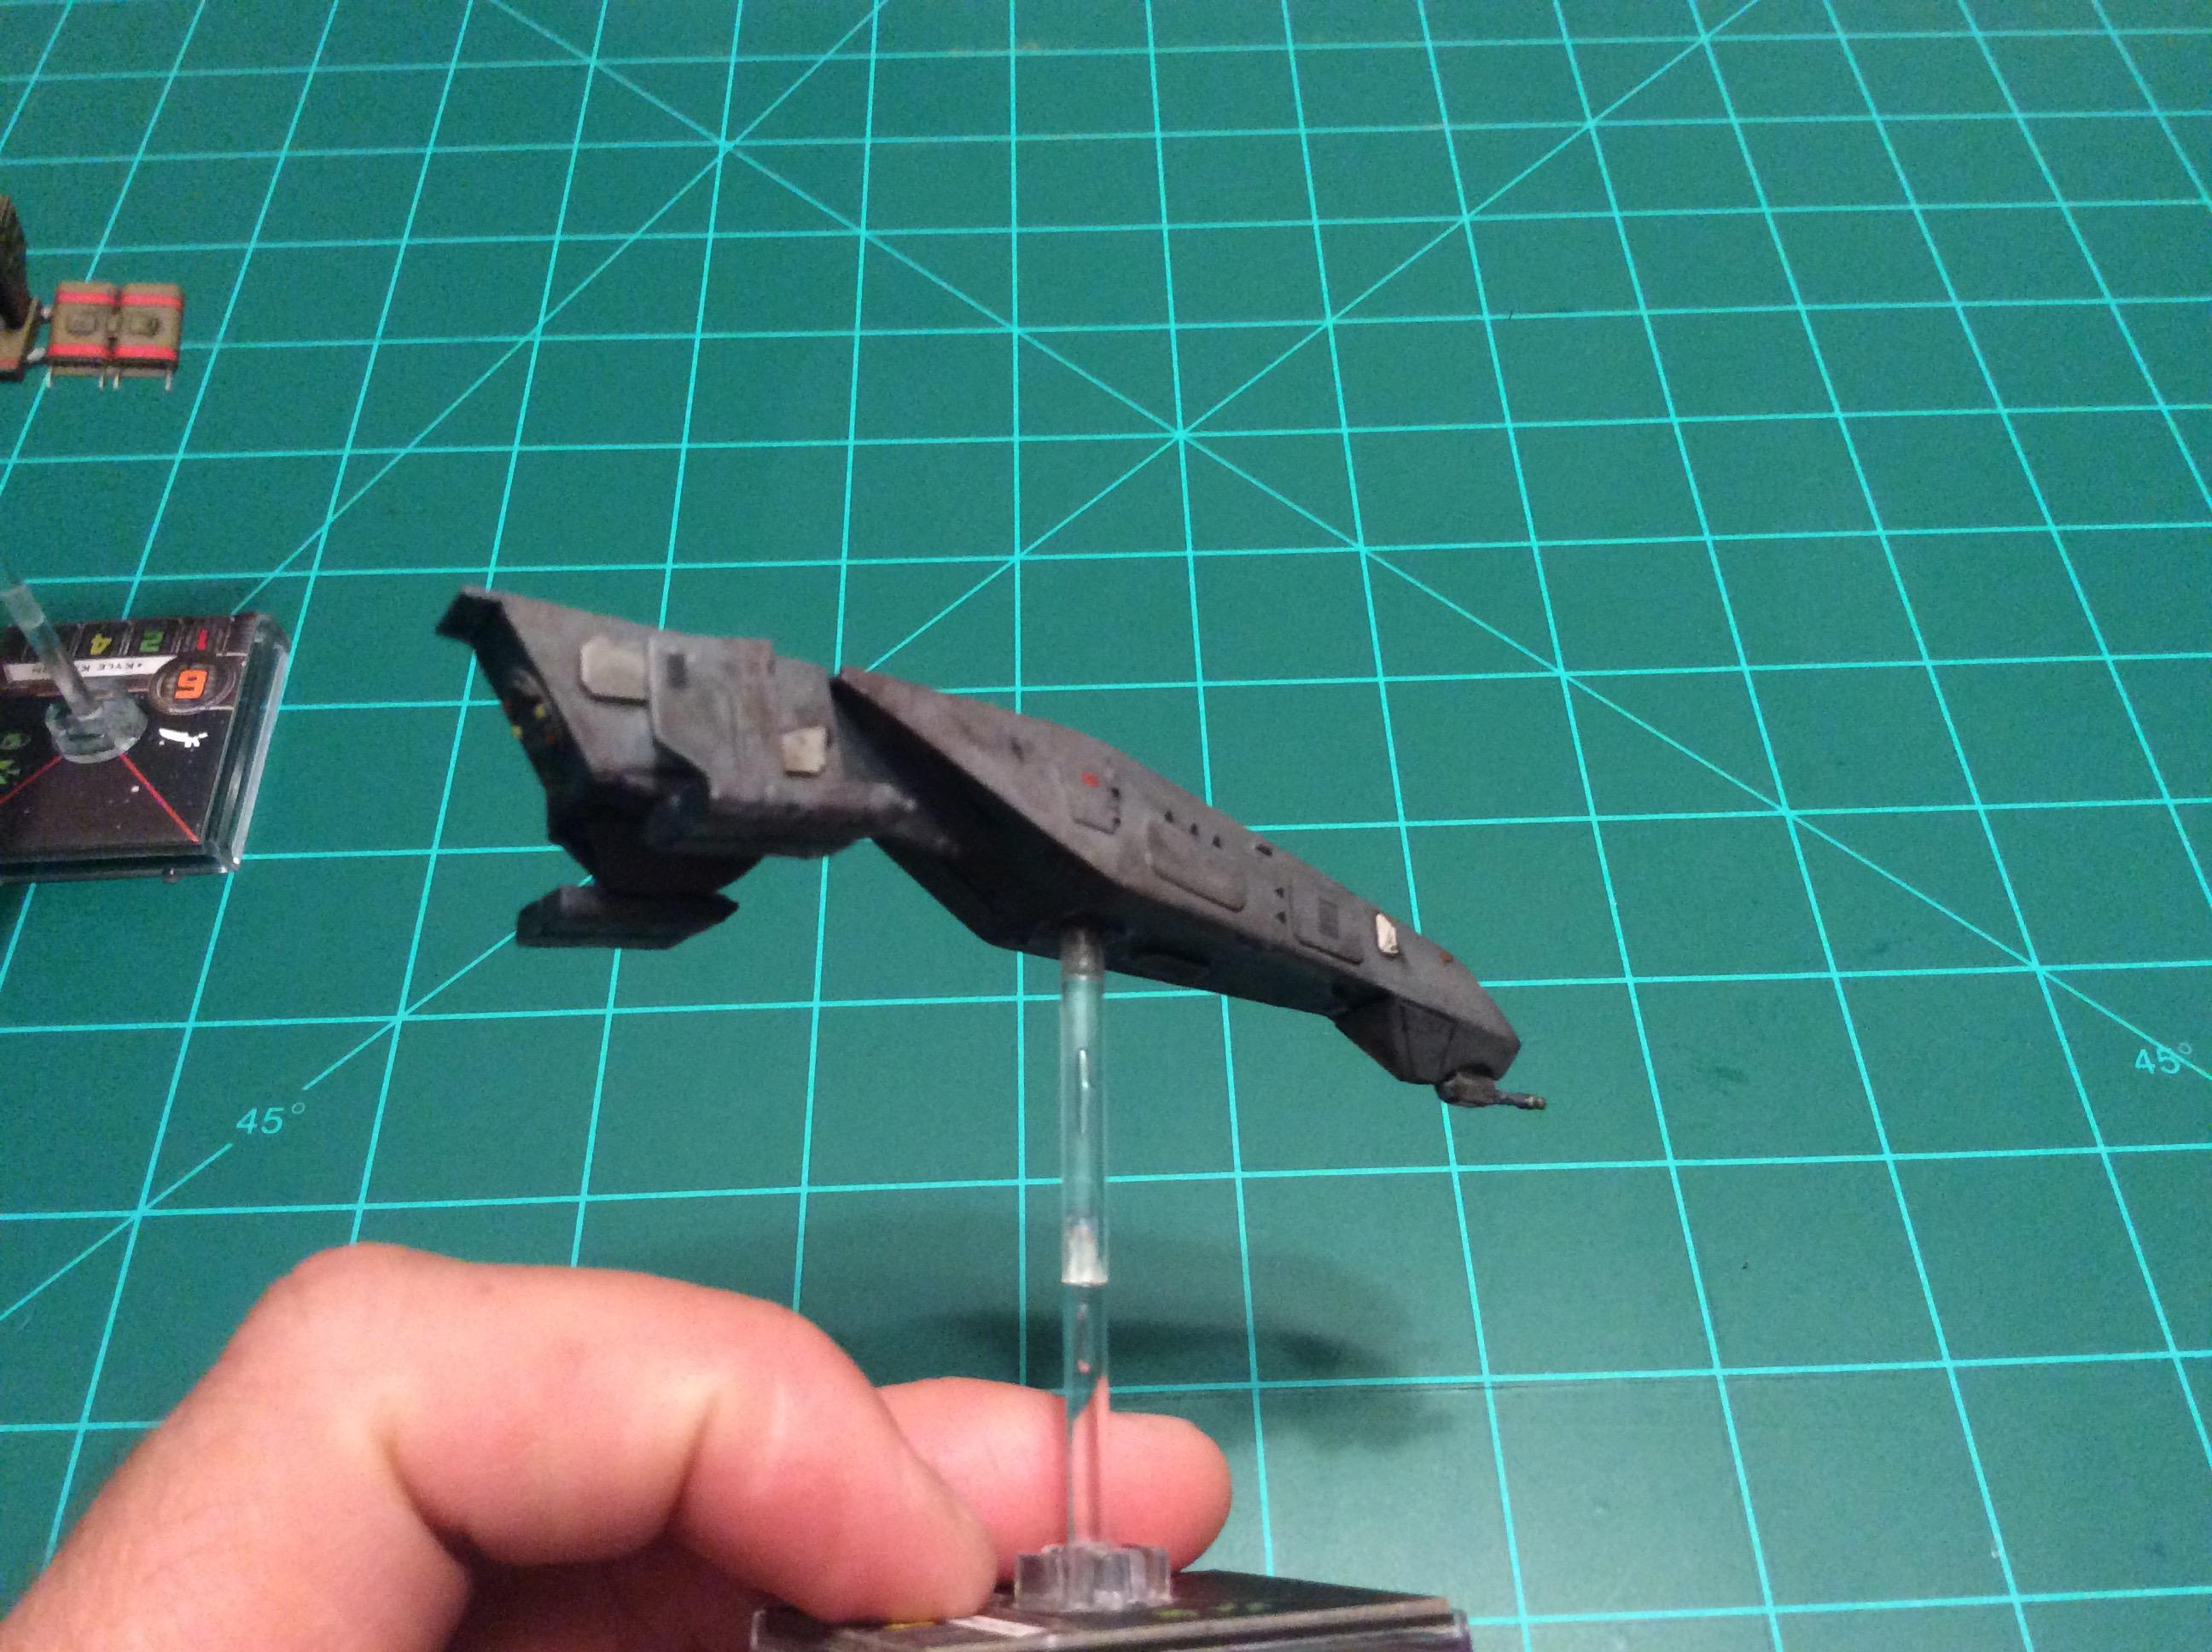 1/270 Scale, Hwk-290, Star Wars, X-wing Miniatures Game